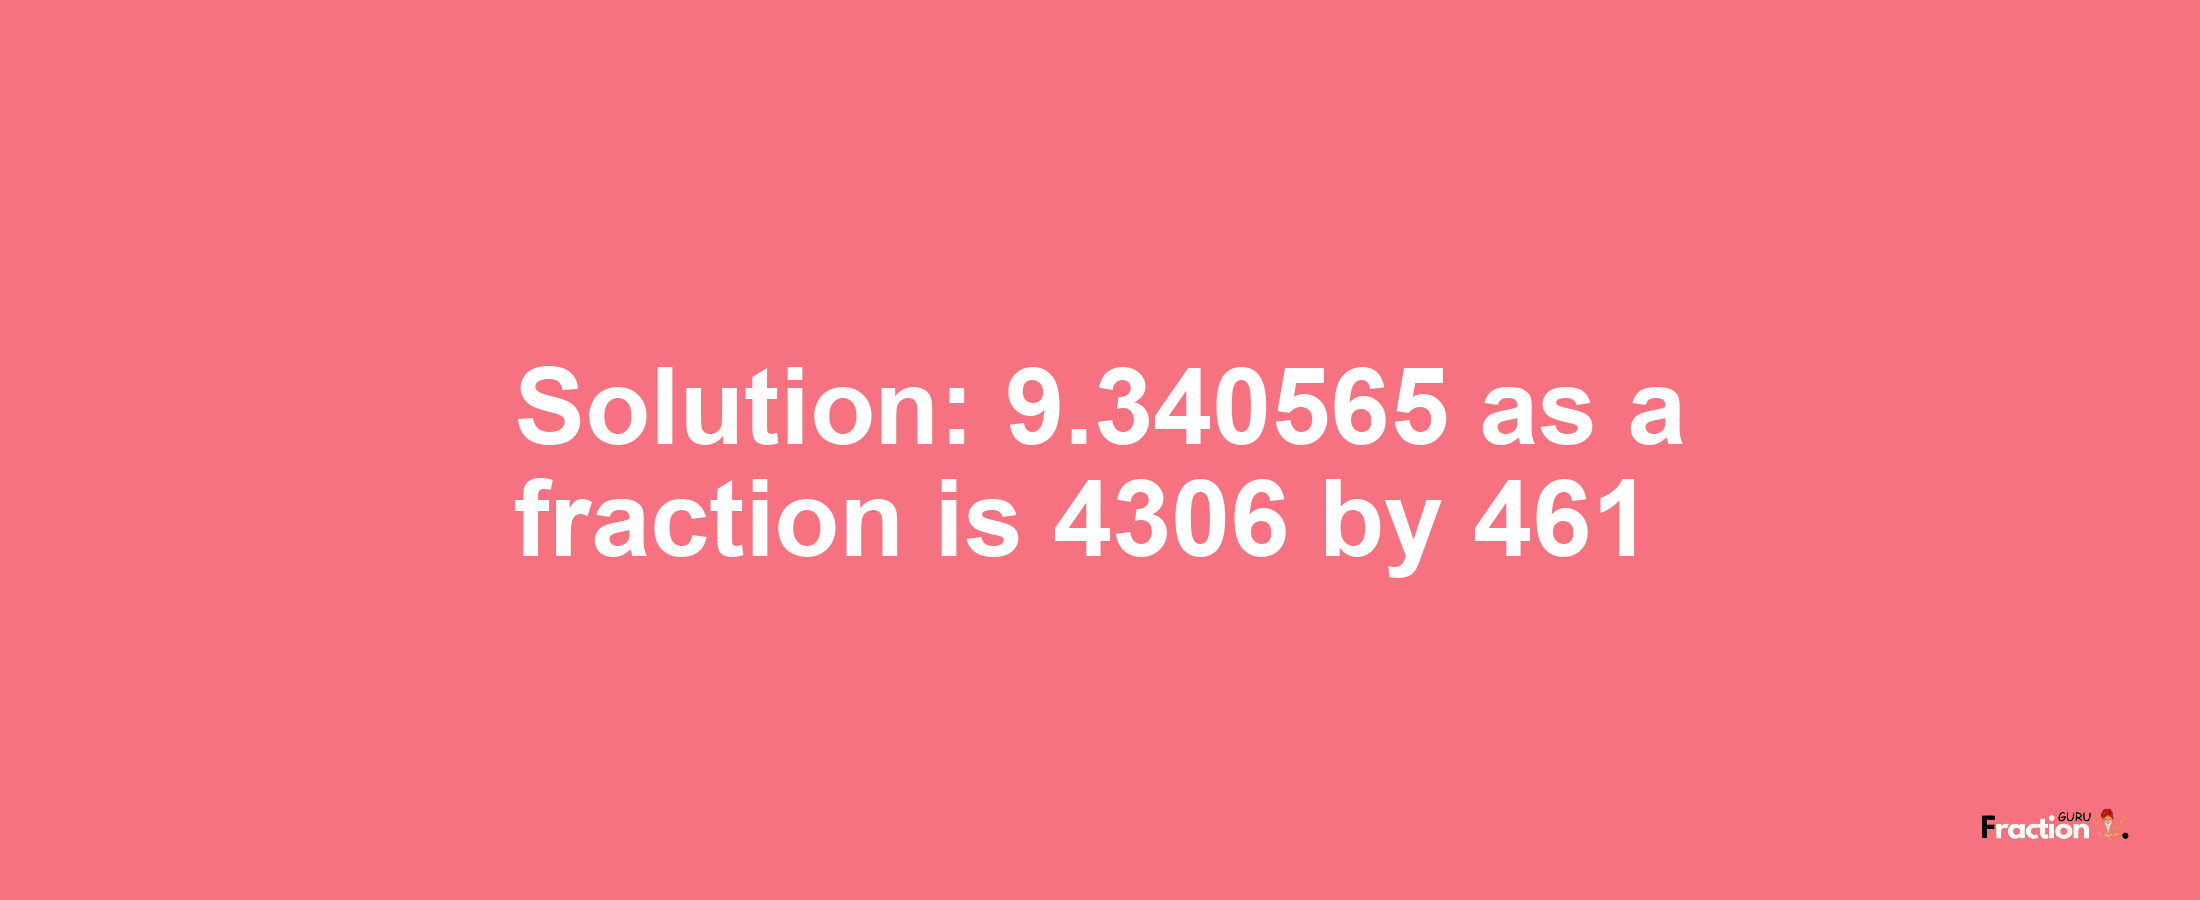 Solution:9.340565 as a fraction is 4306/461